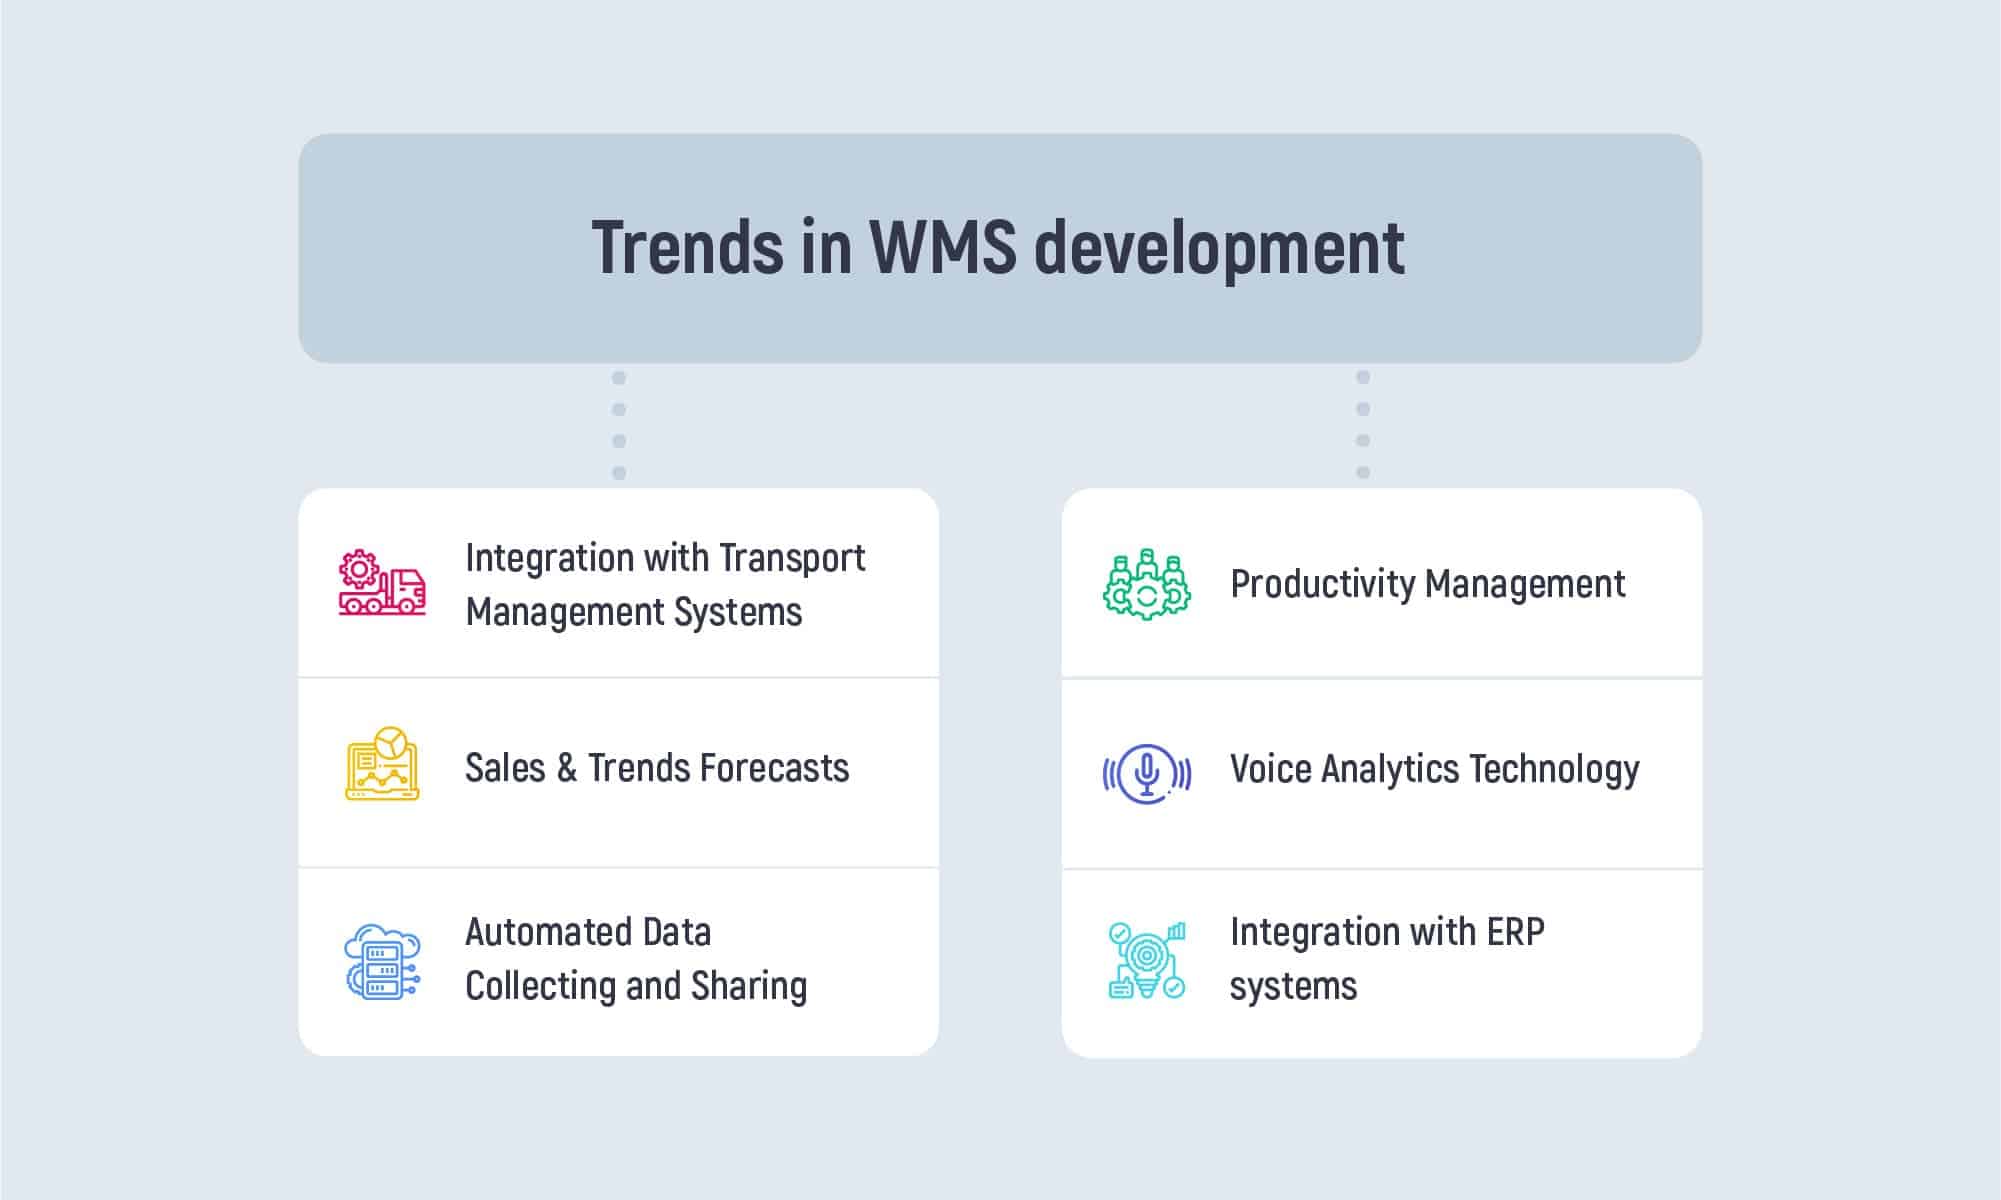 Trends in Warehouse Management Systems (WMS) development